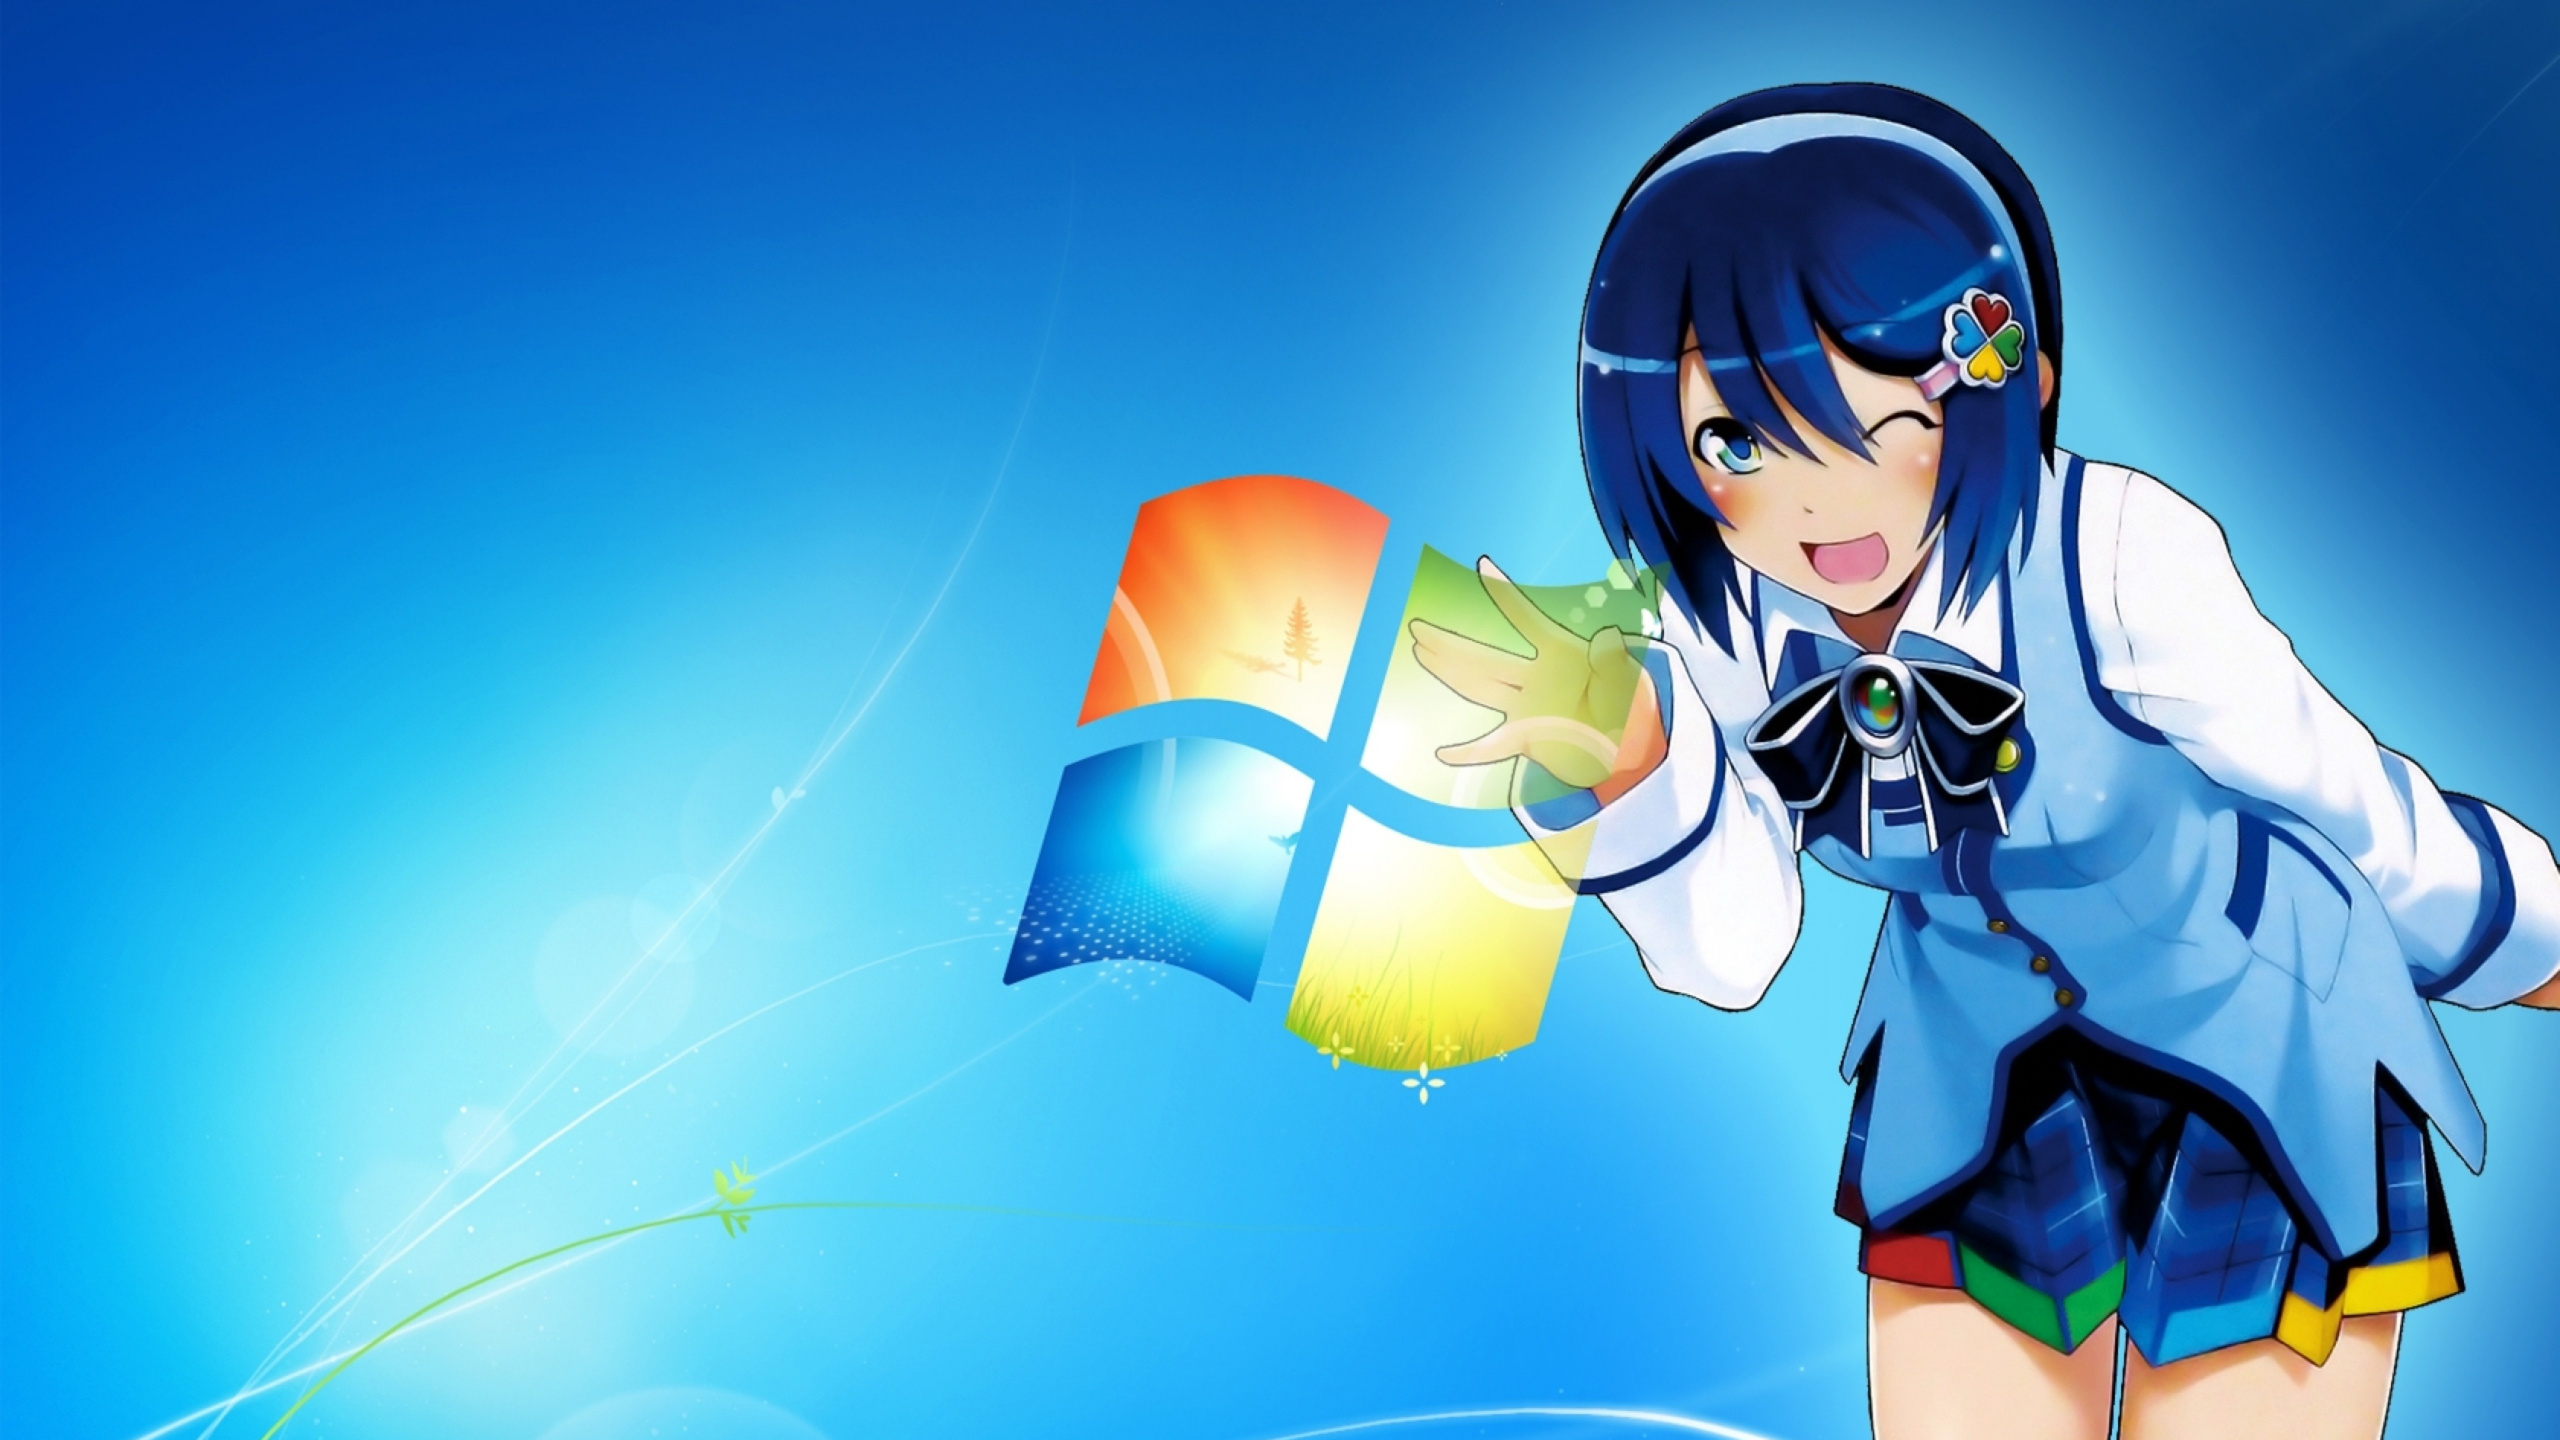 Woman in Blue and White School Uniform Anime Character. Wallpaper in 2560x1440 Resolution